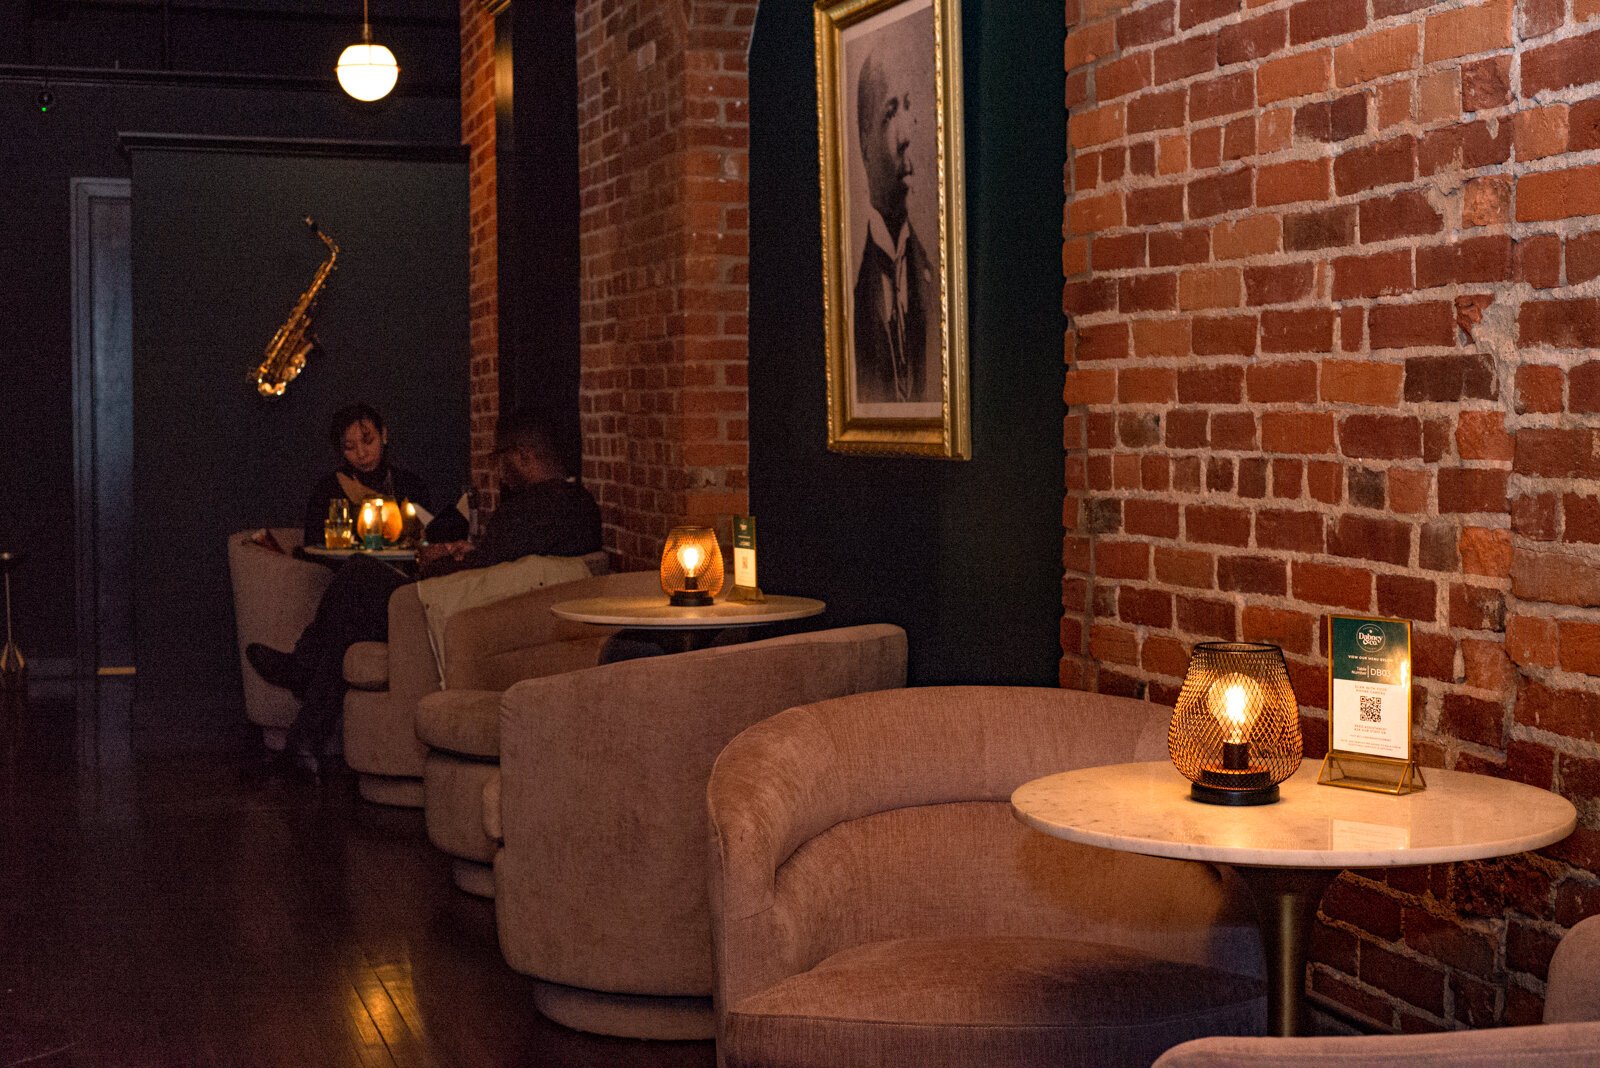 Low lighting and brick walls create a comfortable ambience at Dabney and Co.